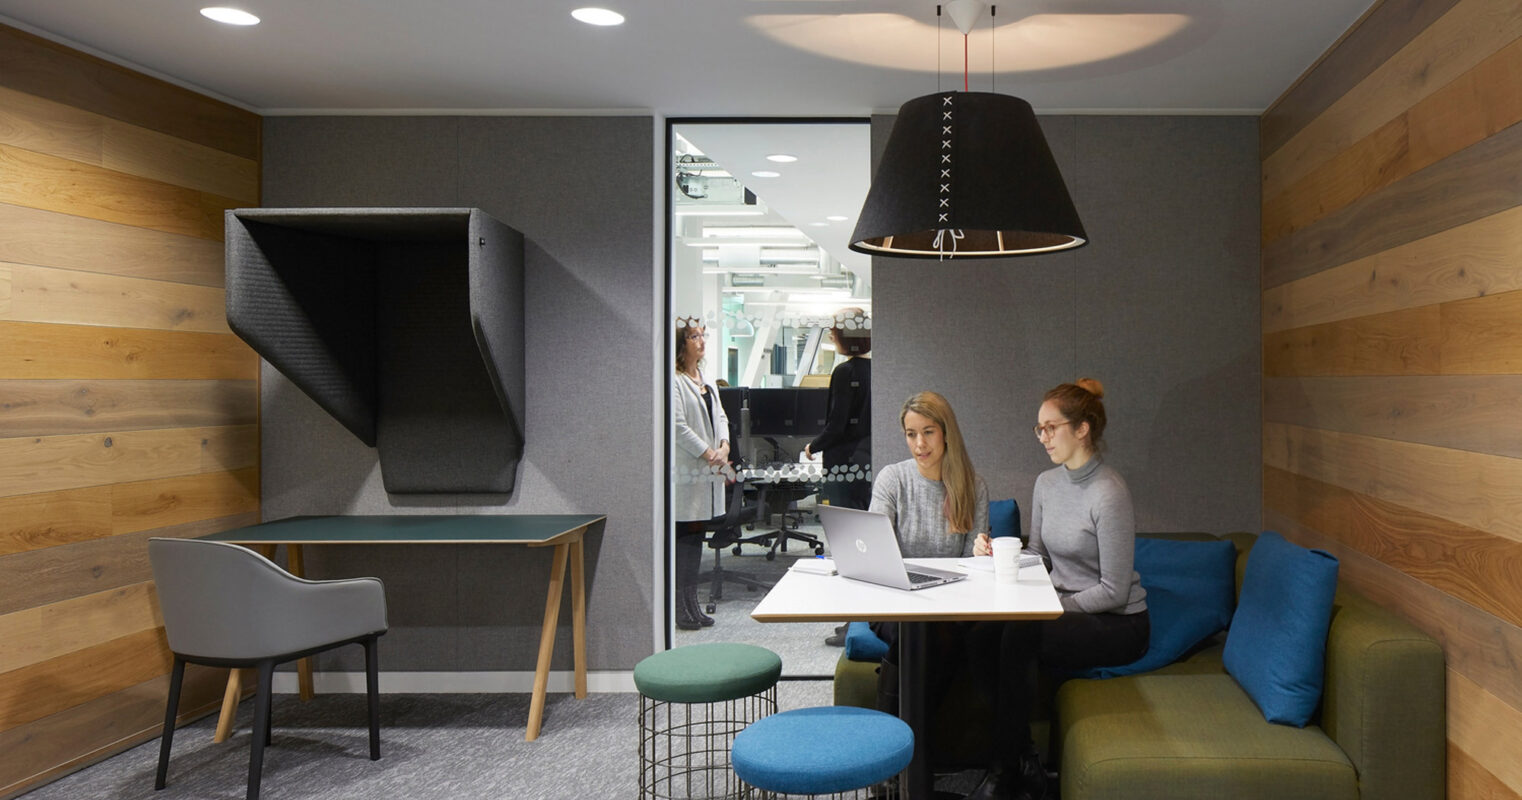 Modern office lounge with neutral gray walls accented by natural wooden paneling. Includes a plush corner sofa, sleek black pendant light, and ergonomic chairs. The space fosters collaboration with a central meeting table and combines comfort with contemporary style.